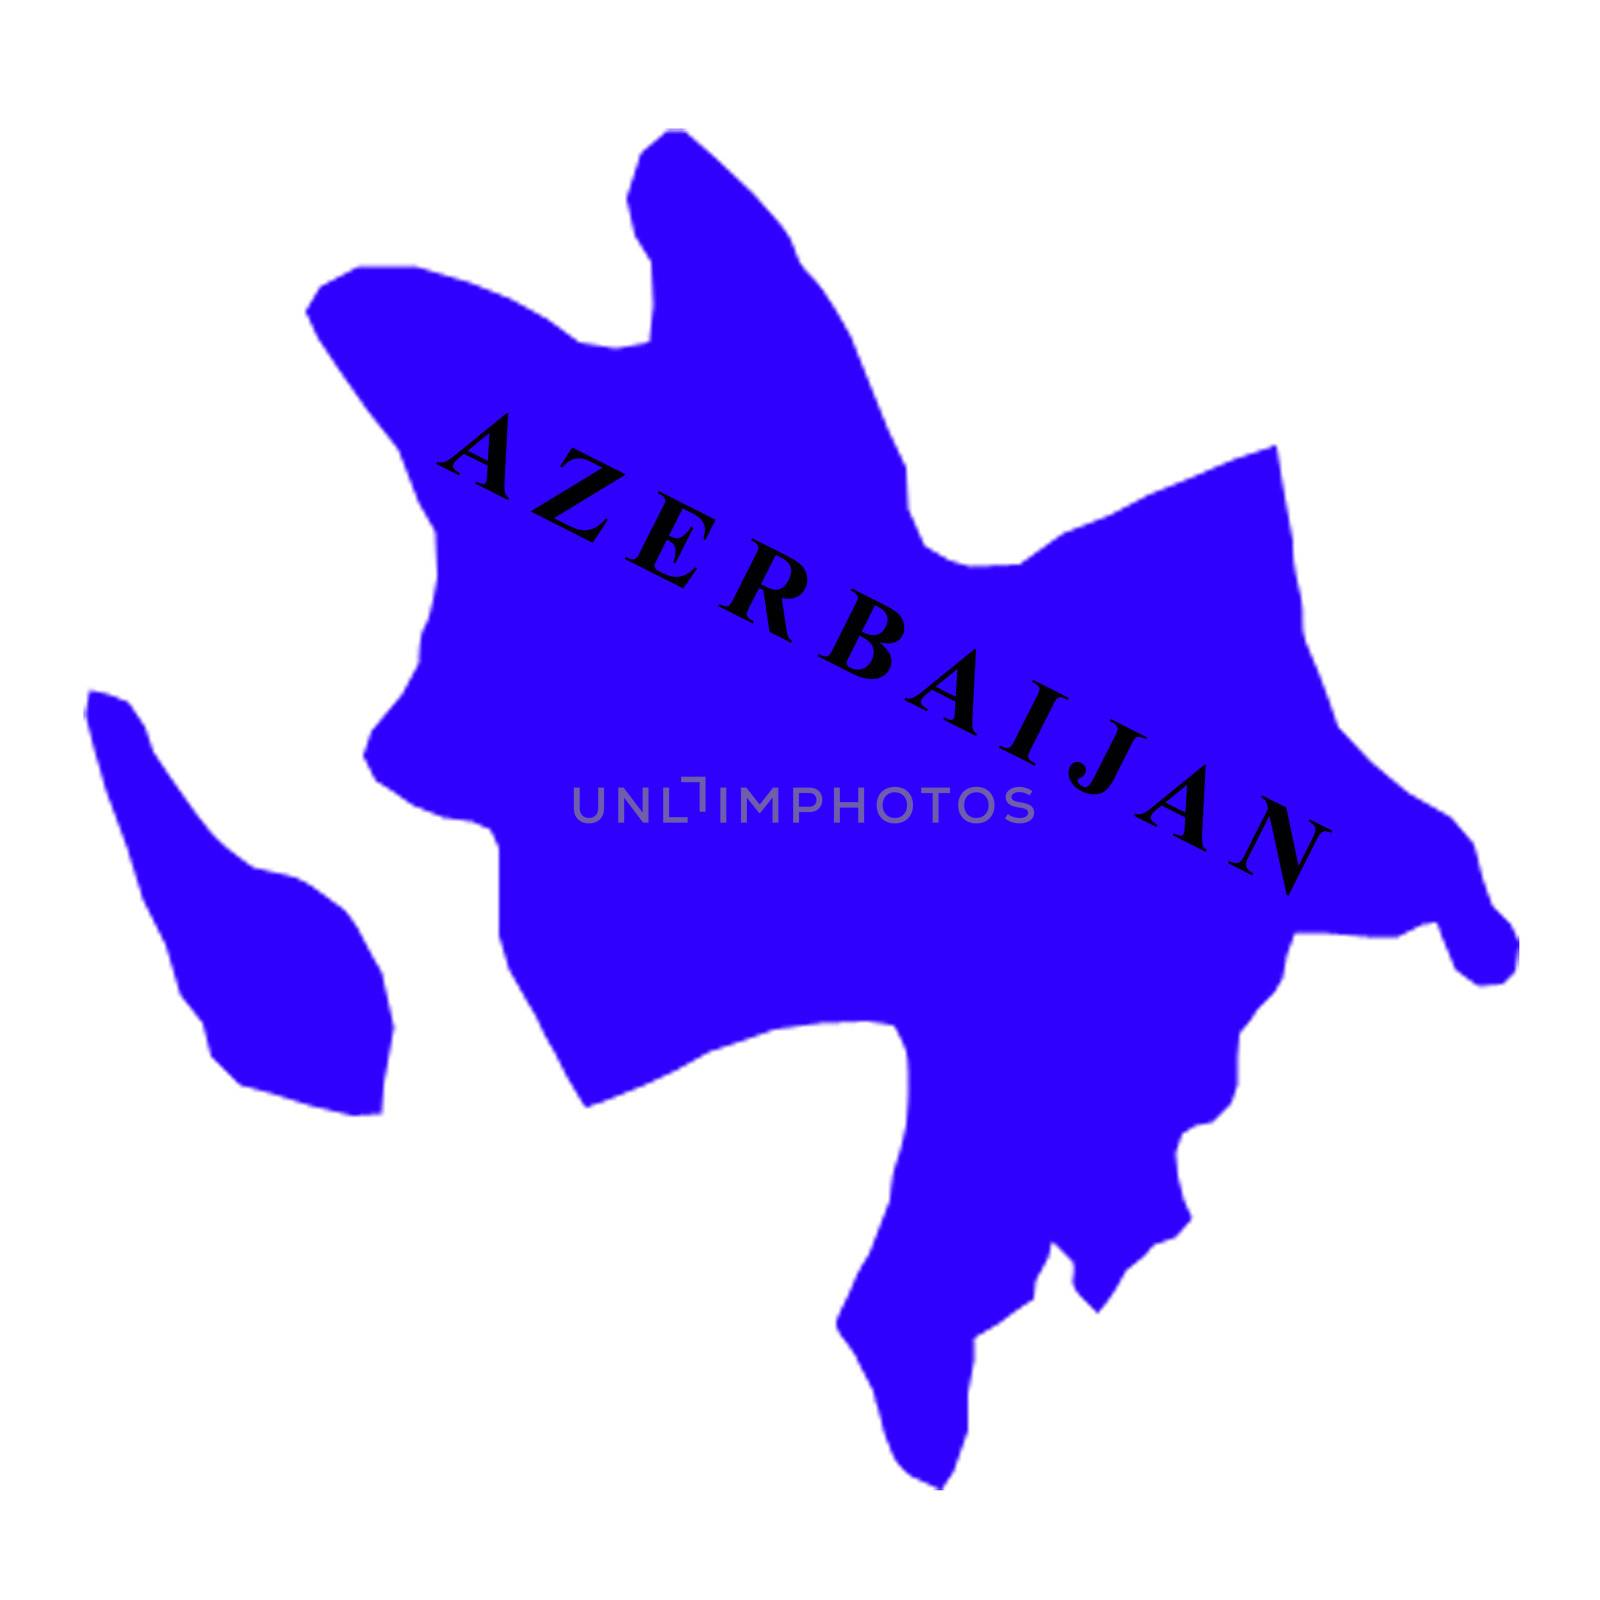 Azerbaijan map textures and backgrounds. illustration.